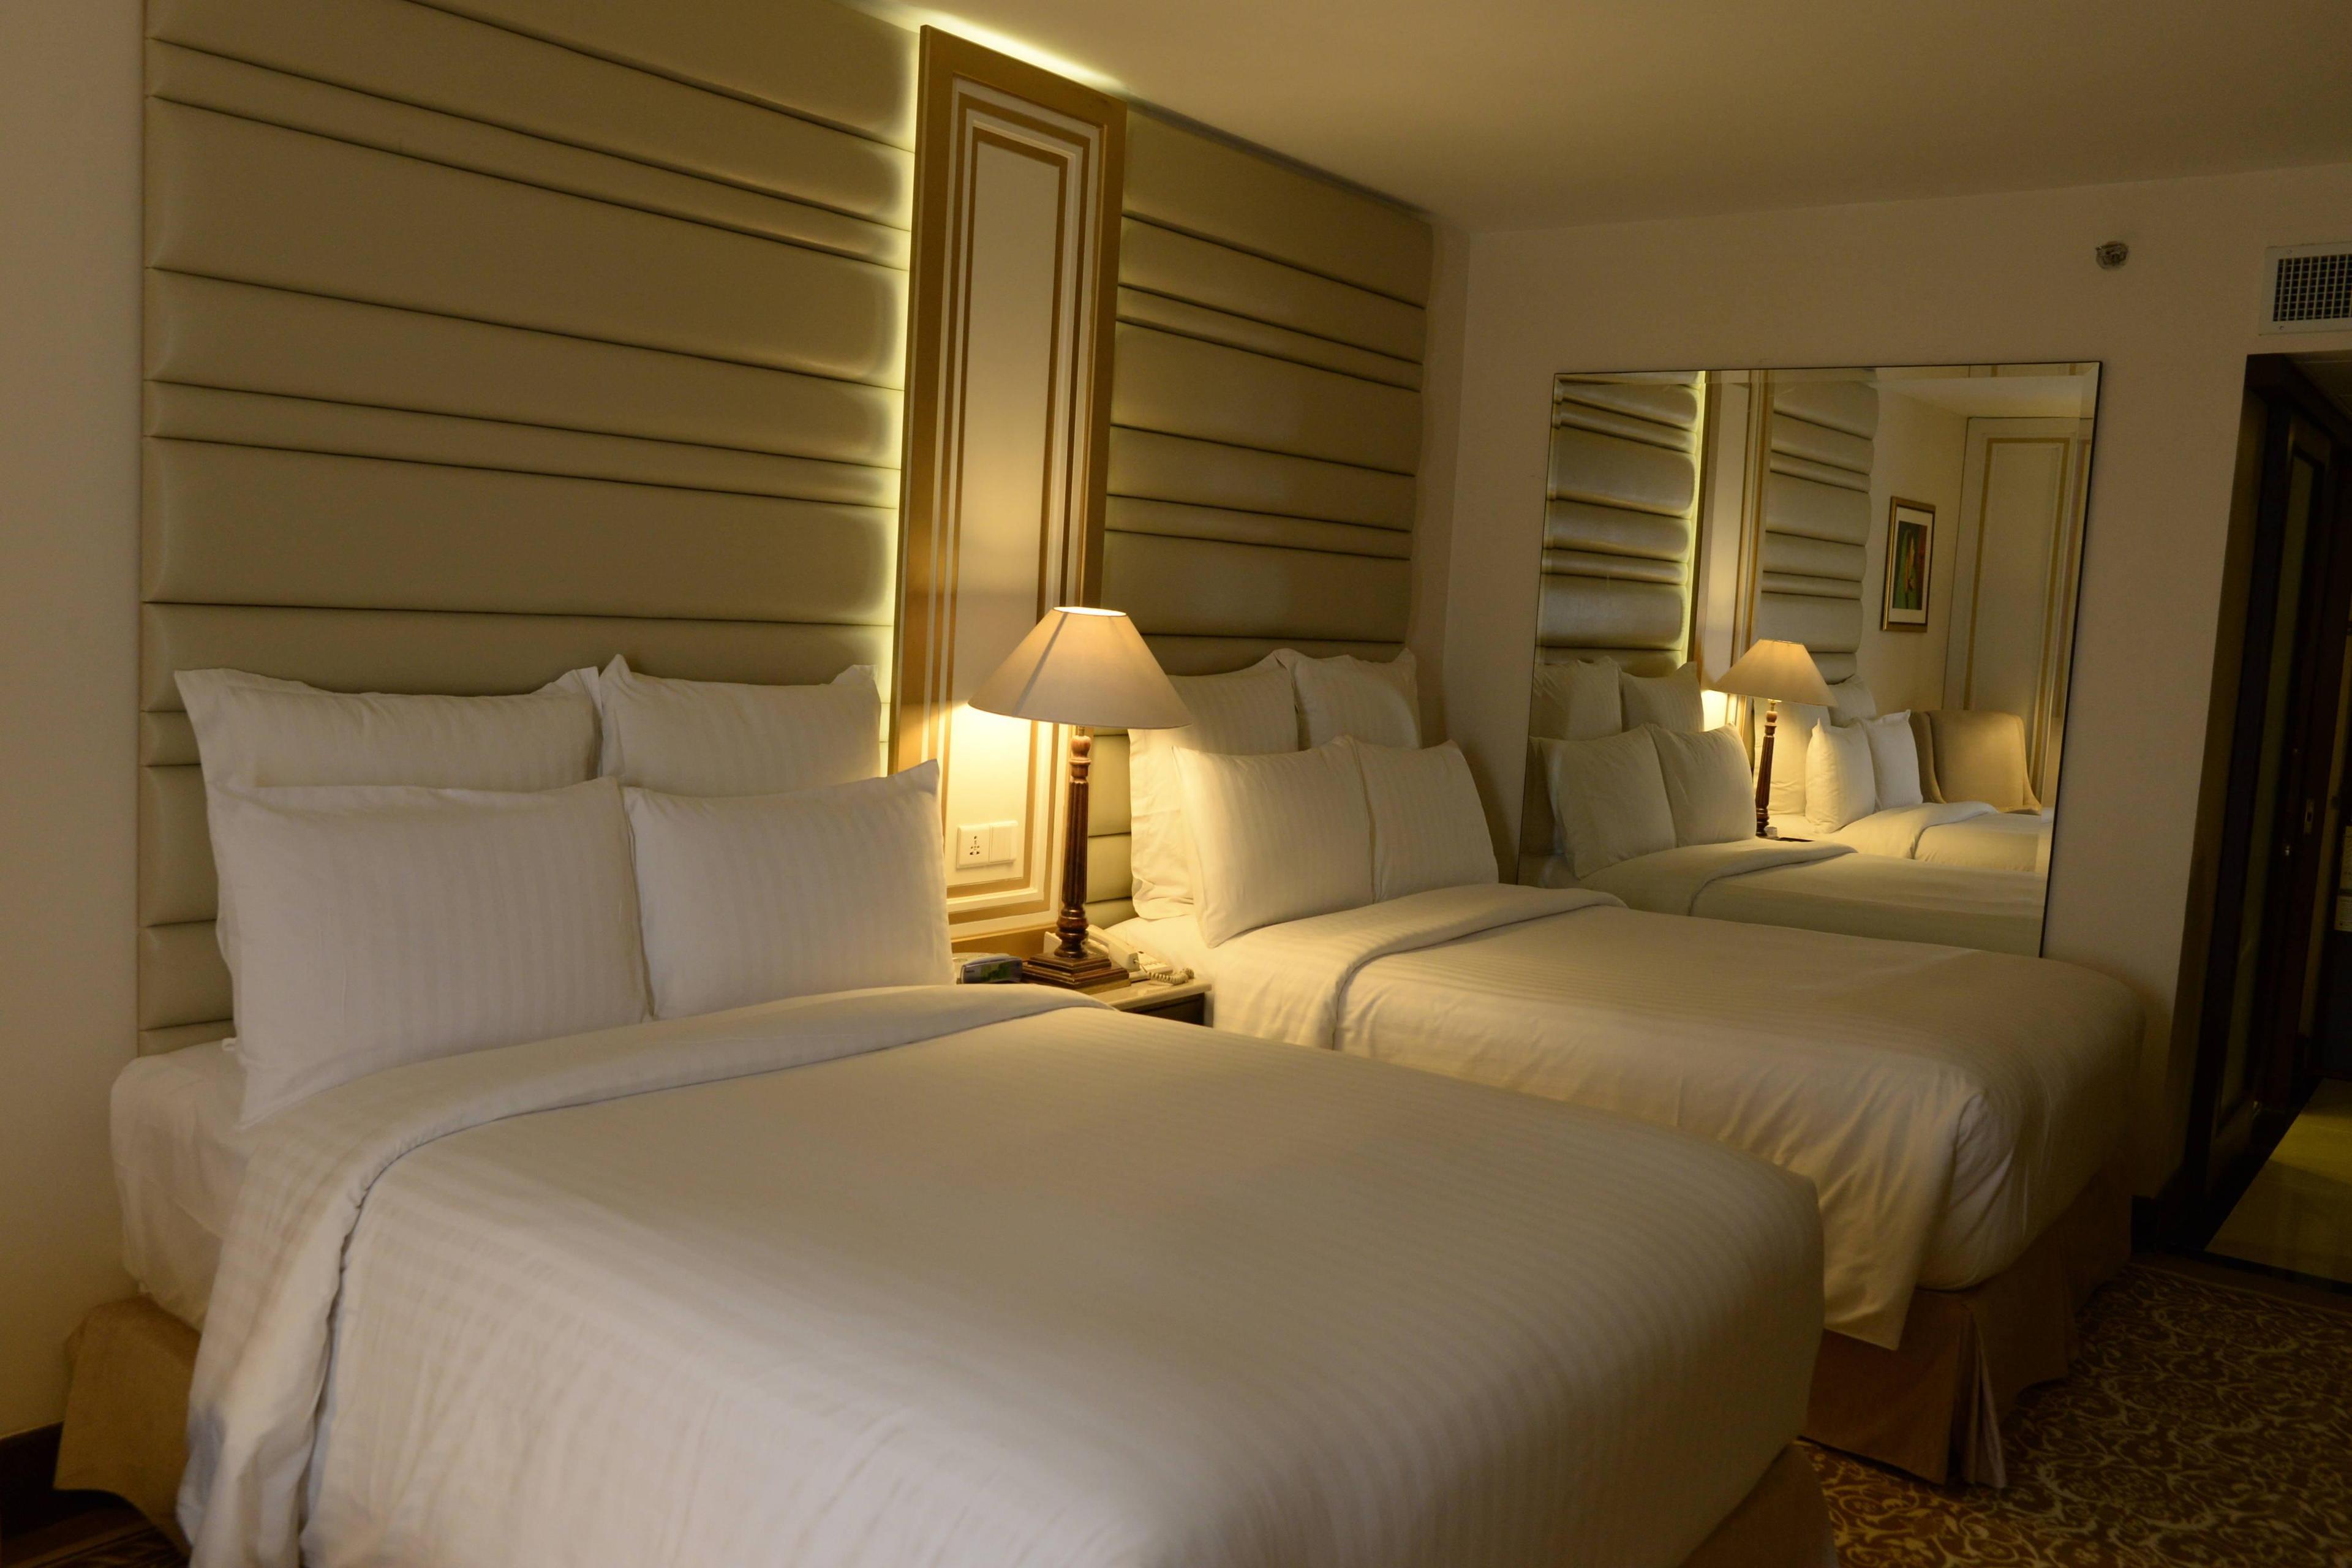 Our deluxe twin/twin guest room sleeping area has a long mirror along with the work desk that is well equipped with modern connectivity plugins, it is big enough to share in comfort.